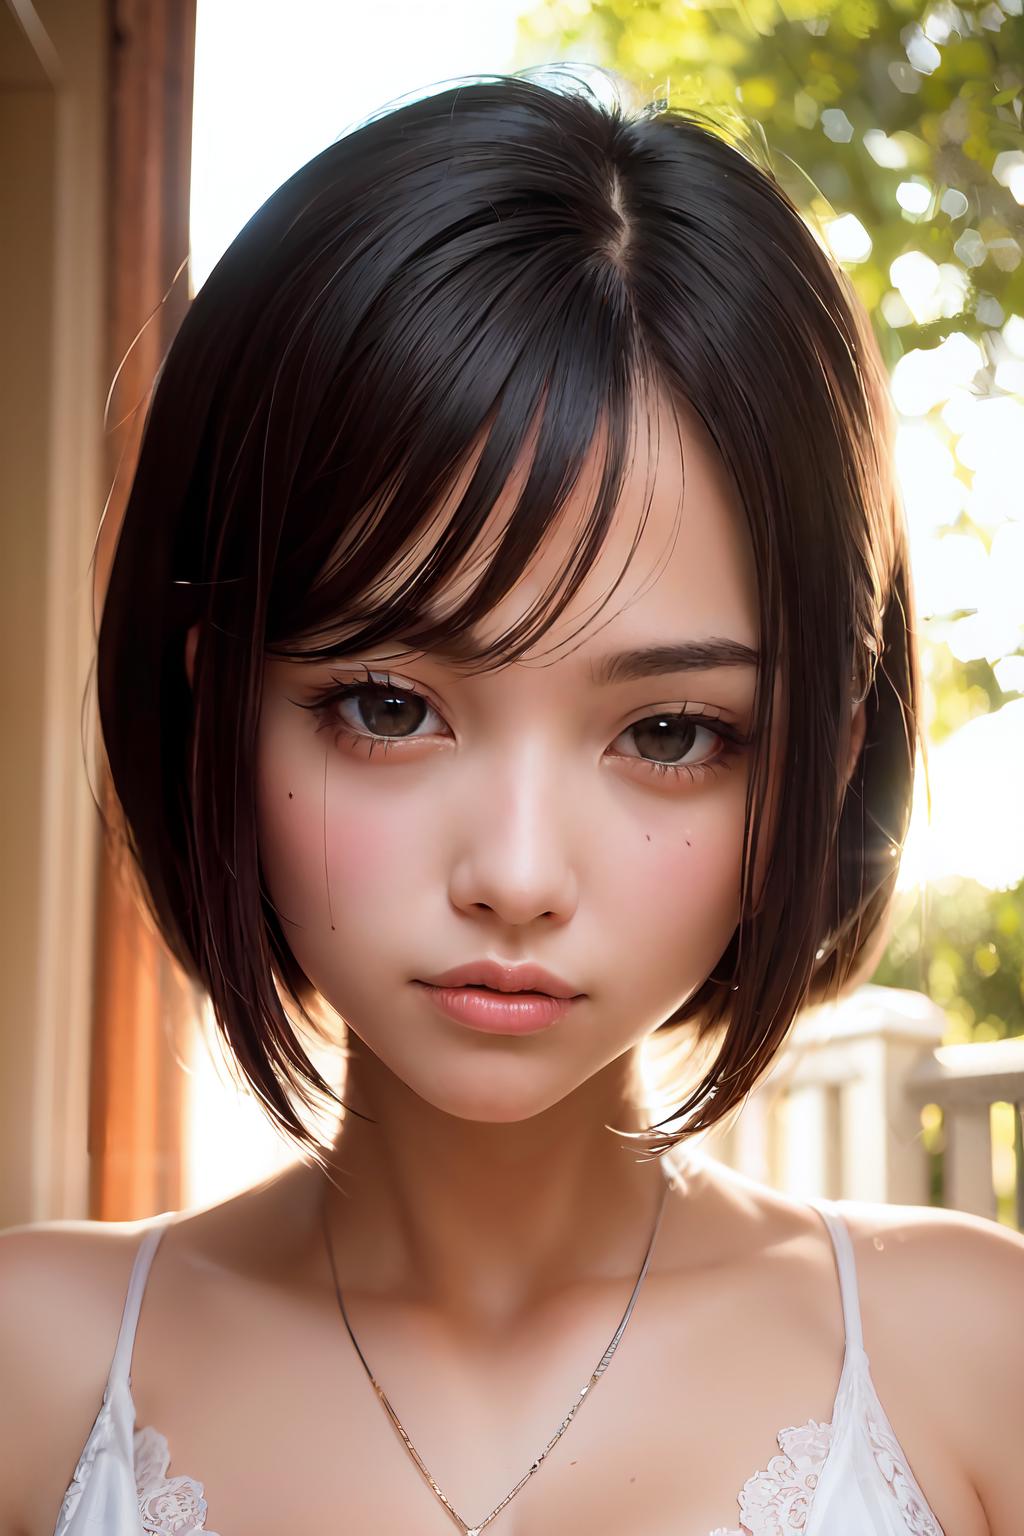 A close-up of a woman with a short bang and brown eyes.